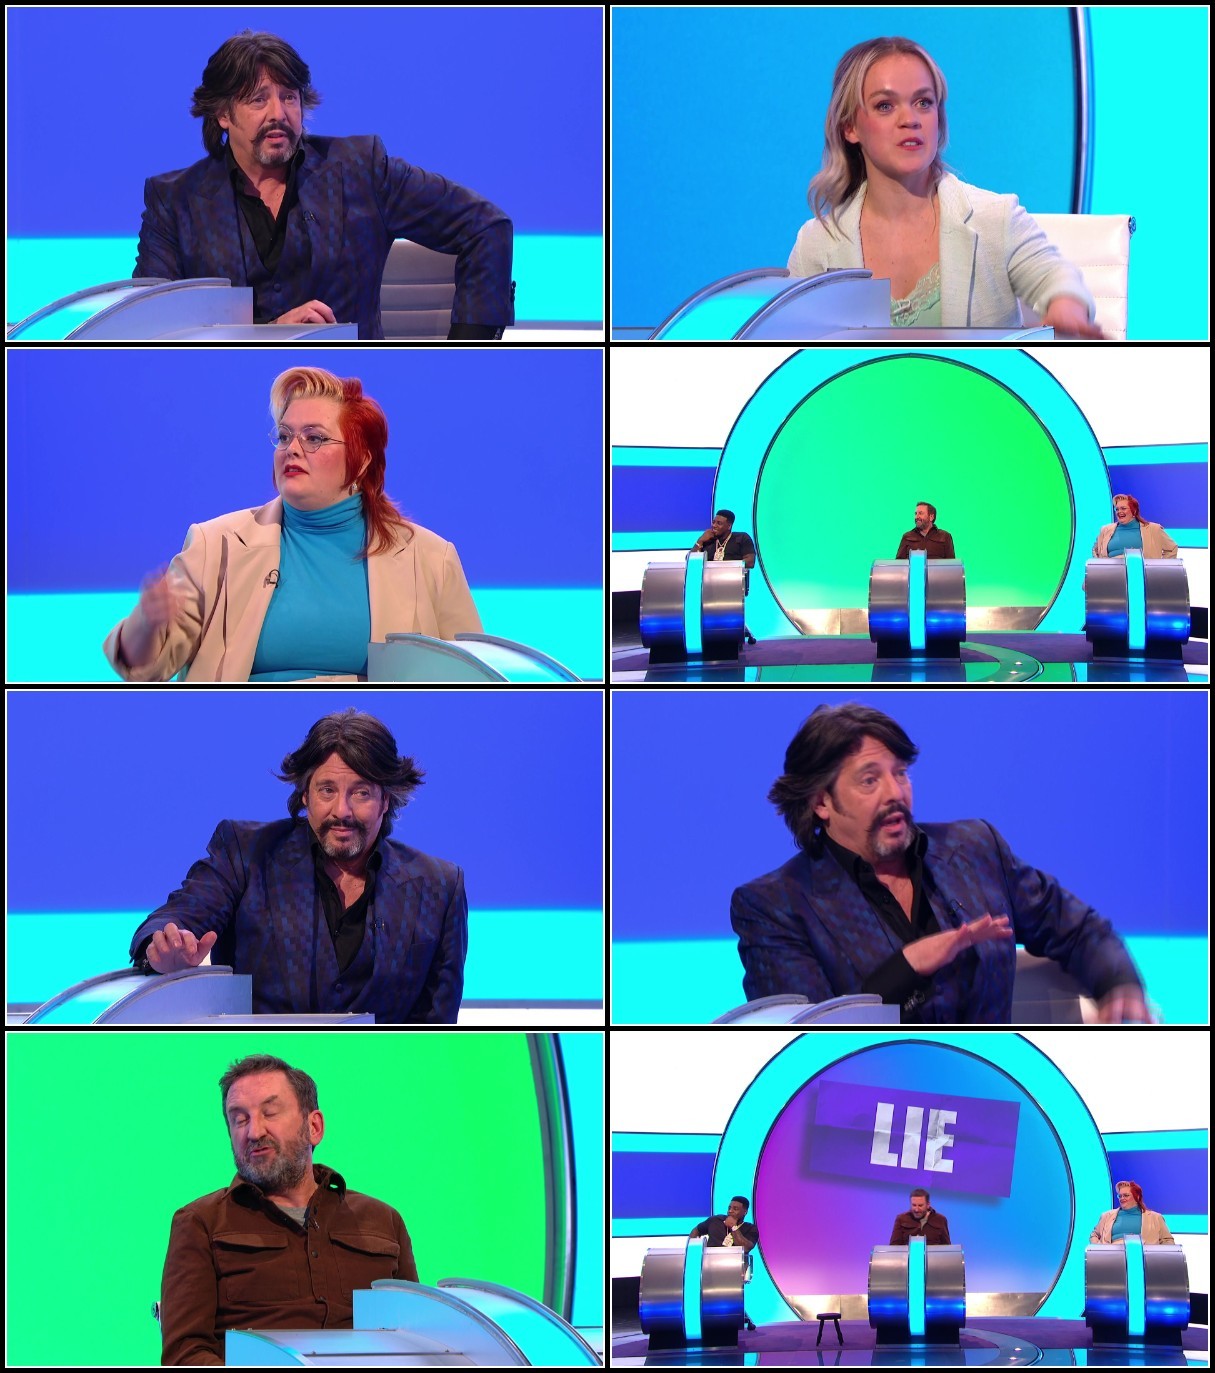 Would I Lie To You S16E04 1080p HDTV H264-FTP